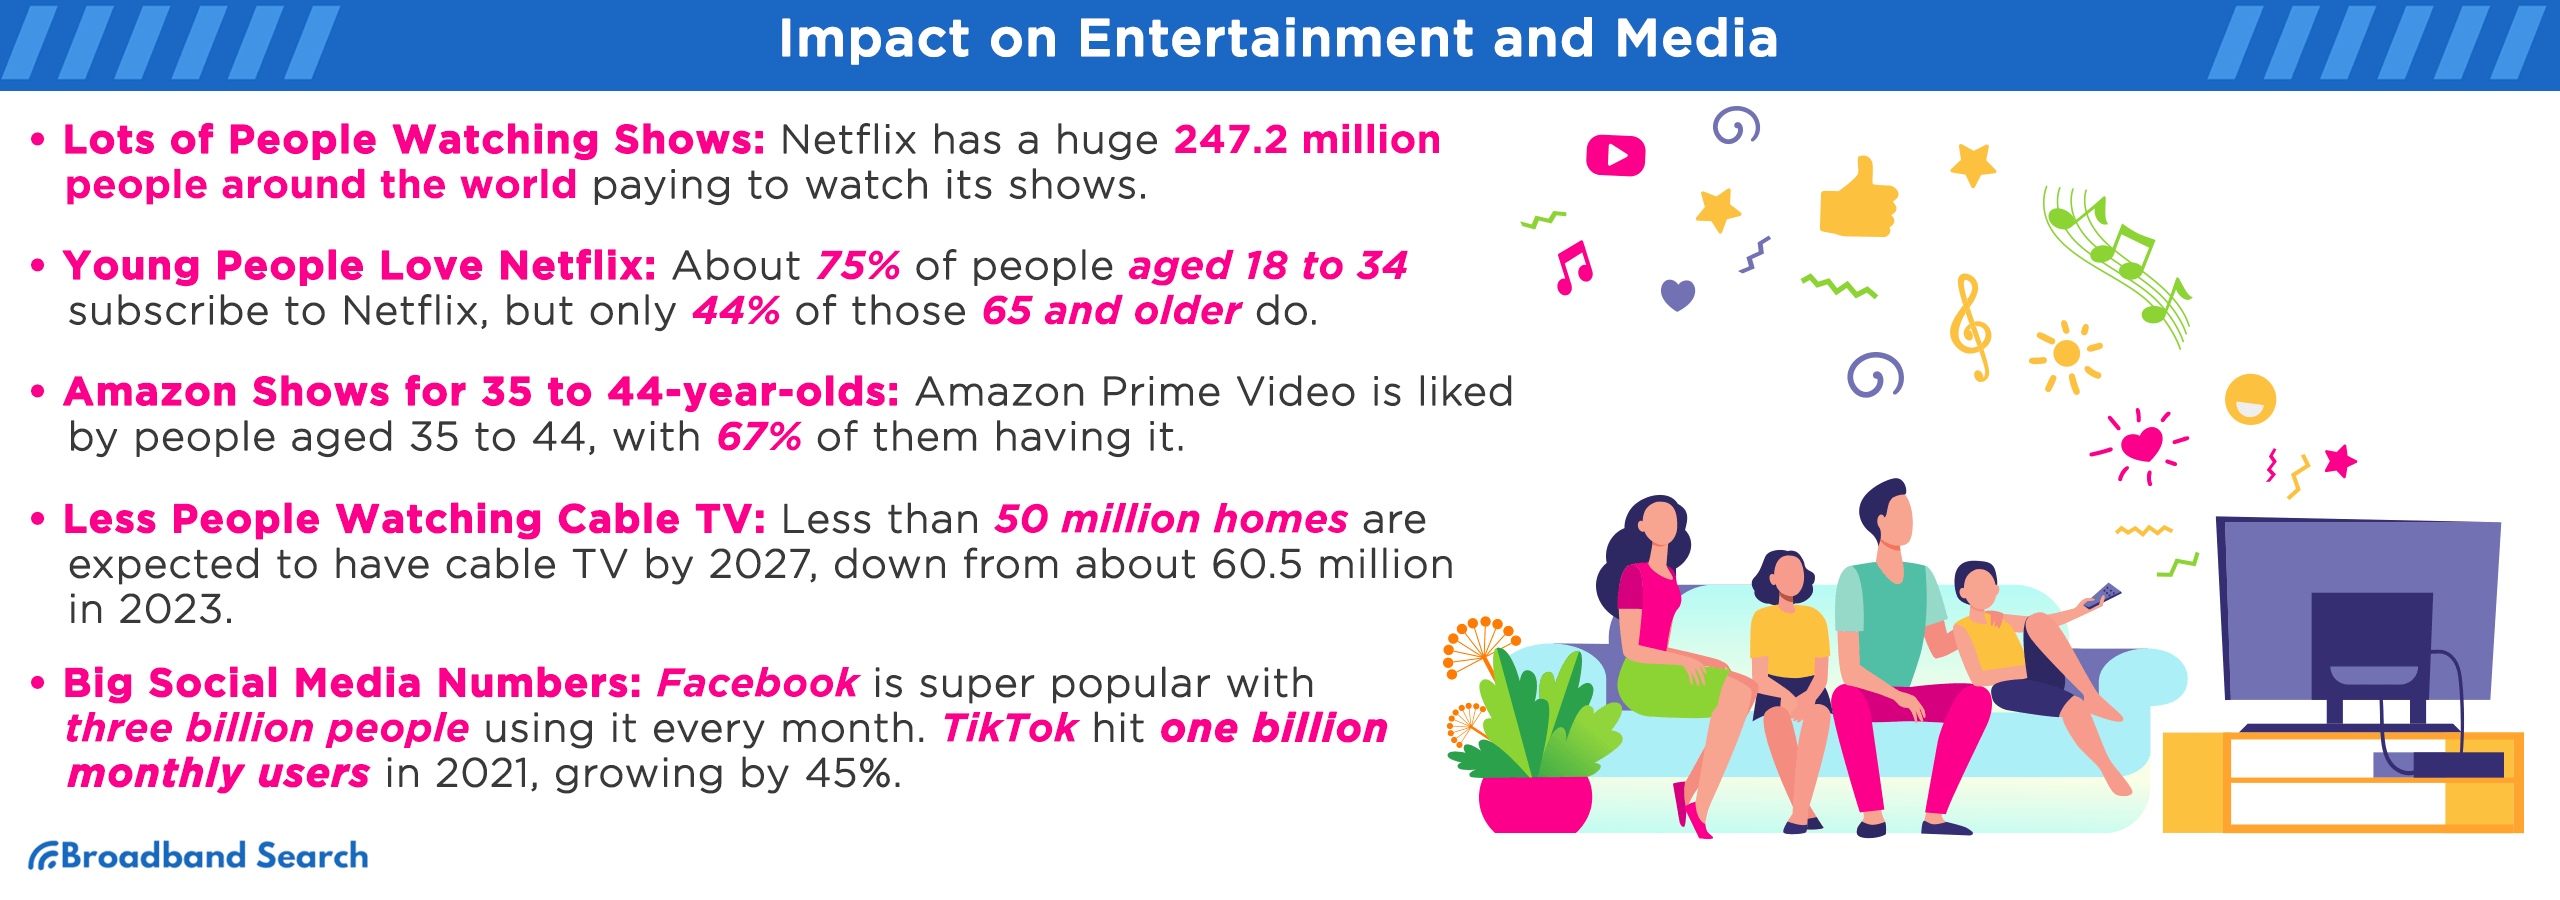 Impact on Entertainment and Media